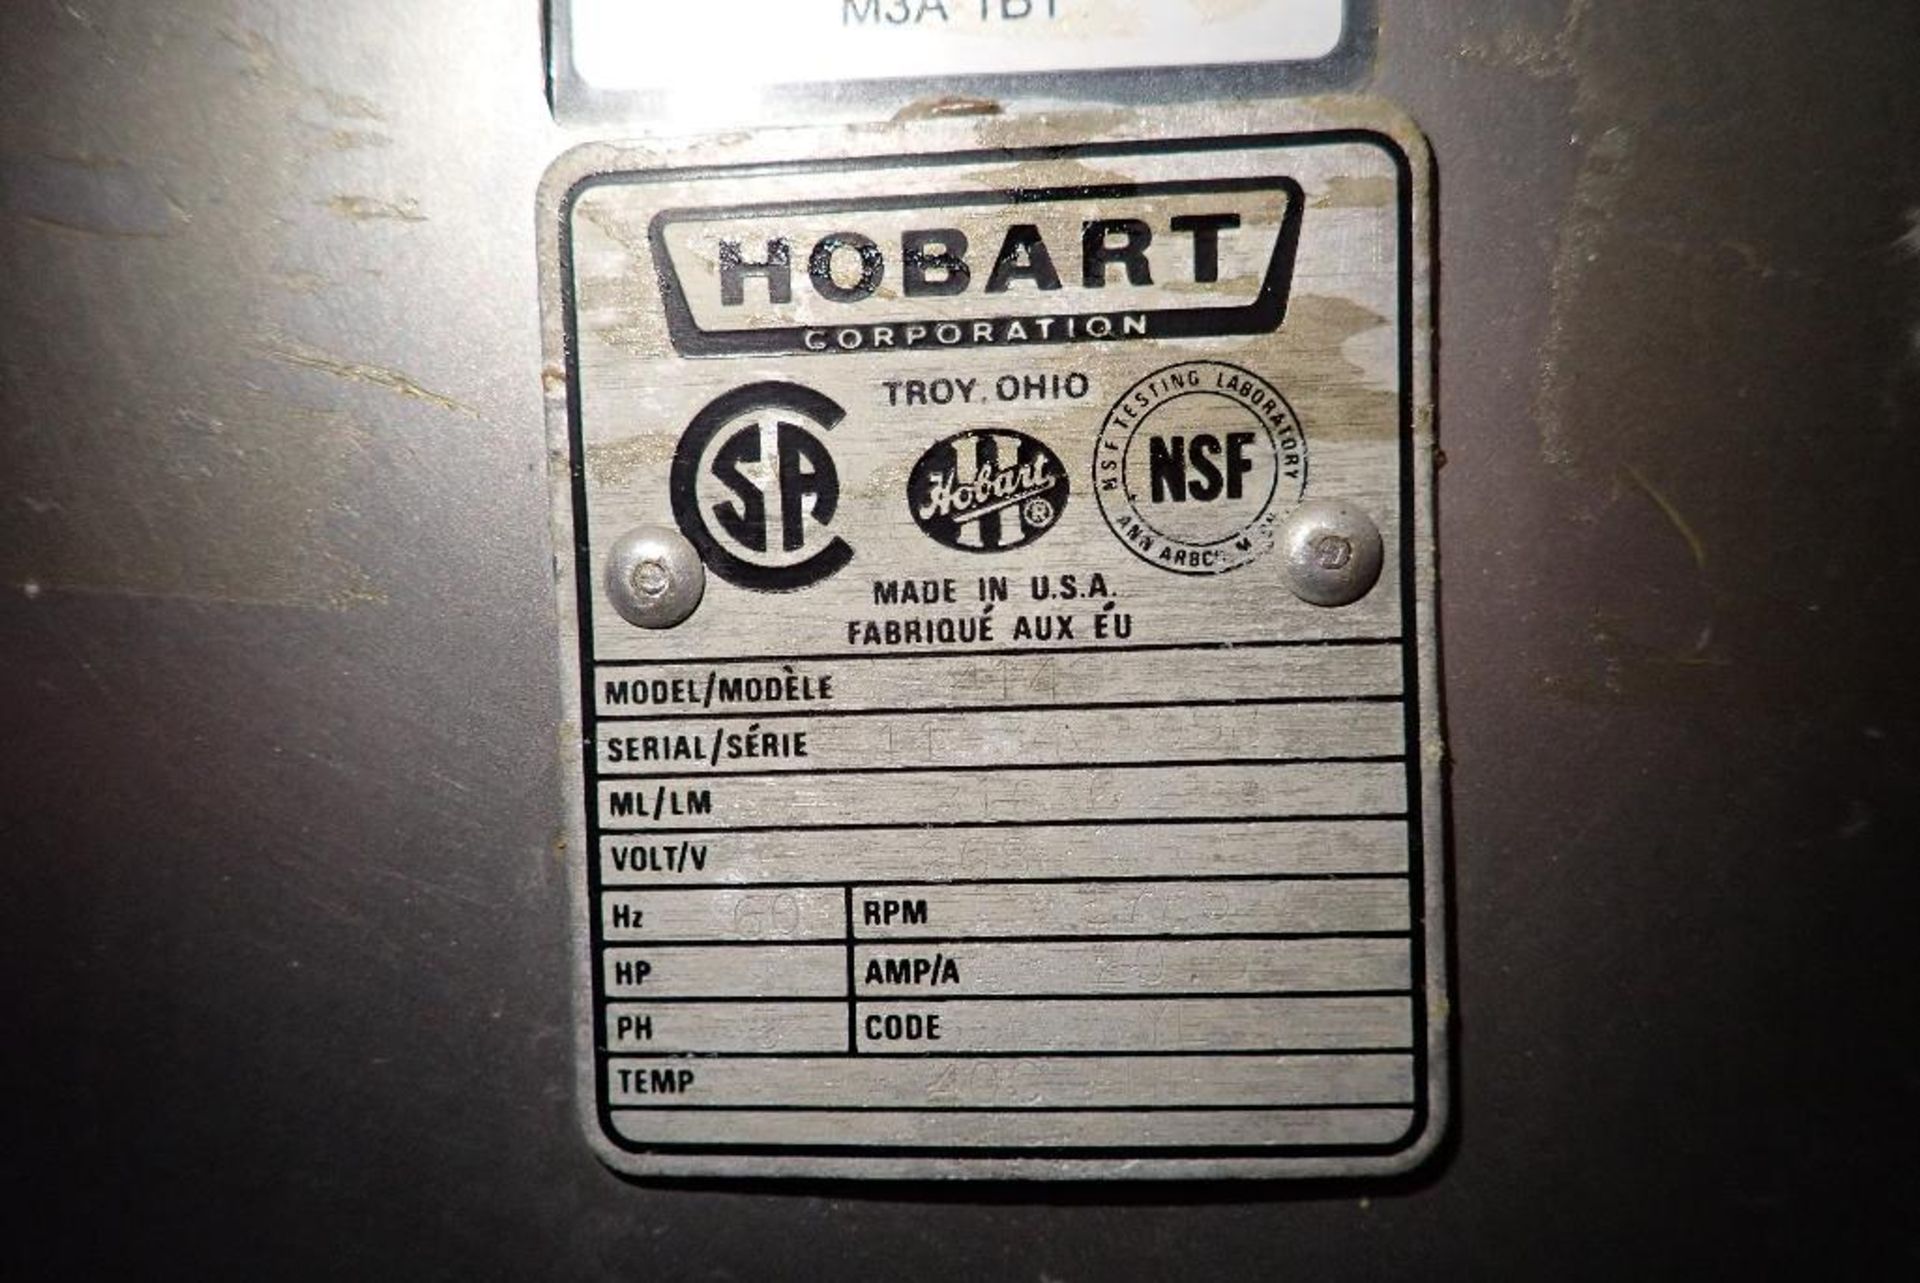 Hobart grinder, Model 4146, SN 11-343-098, 3 ph., SS top, 47 in. long x 24 in. wide, augers, blades, - Image 9 of 9